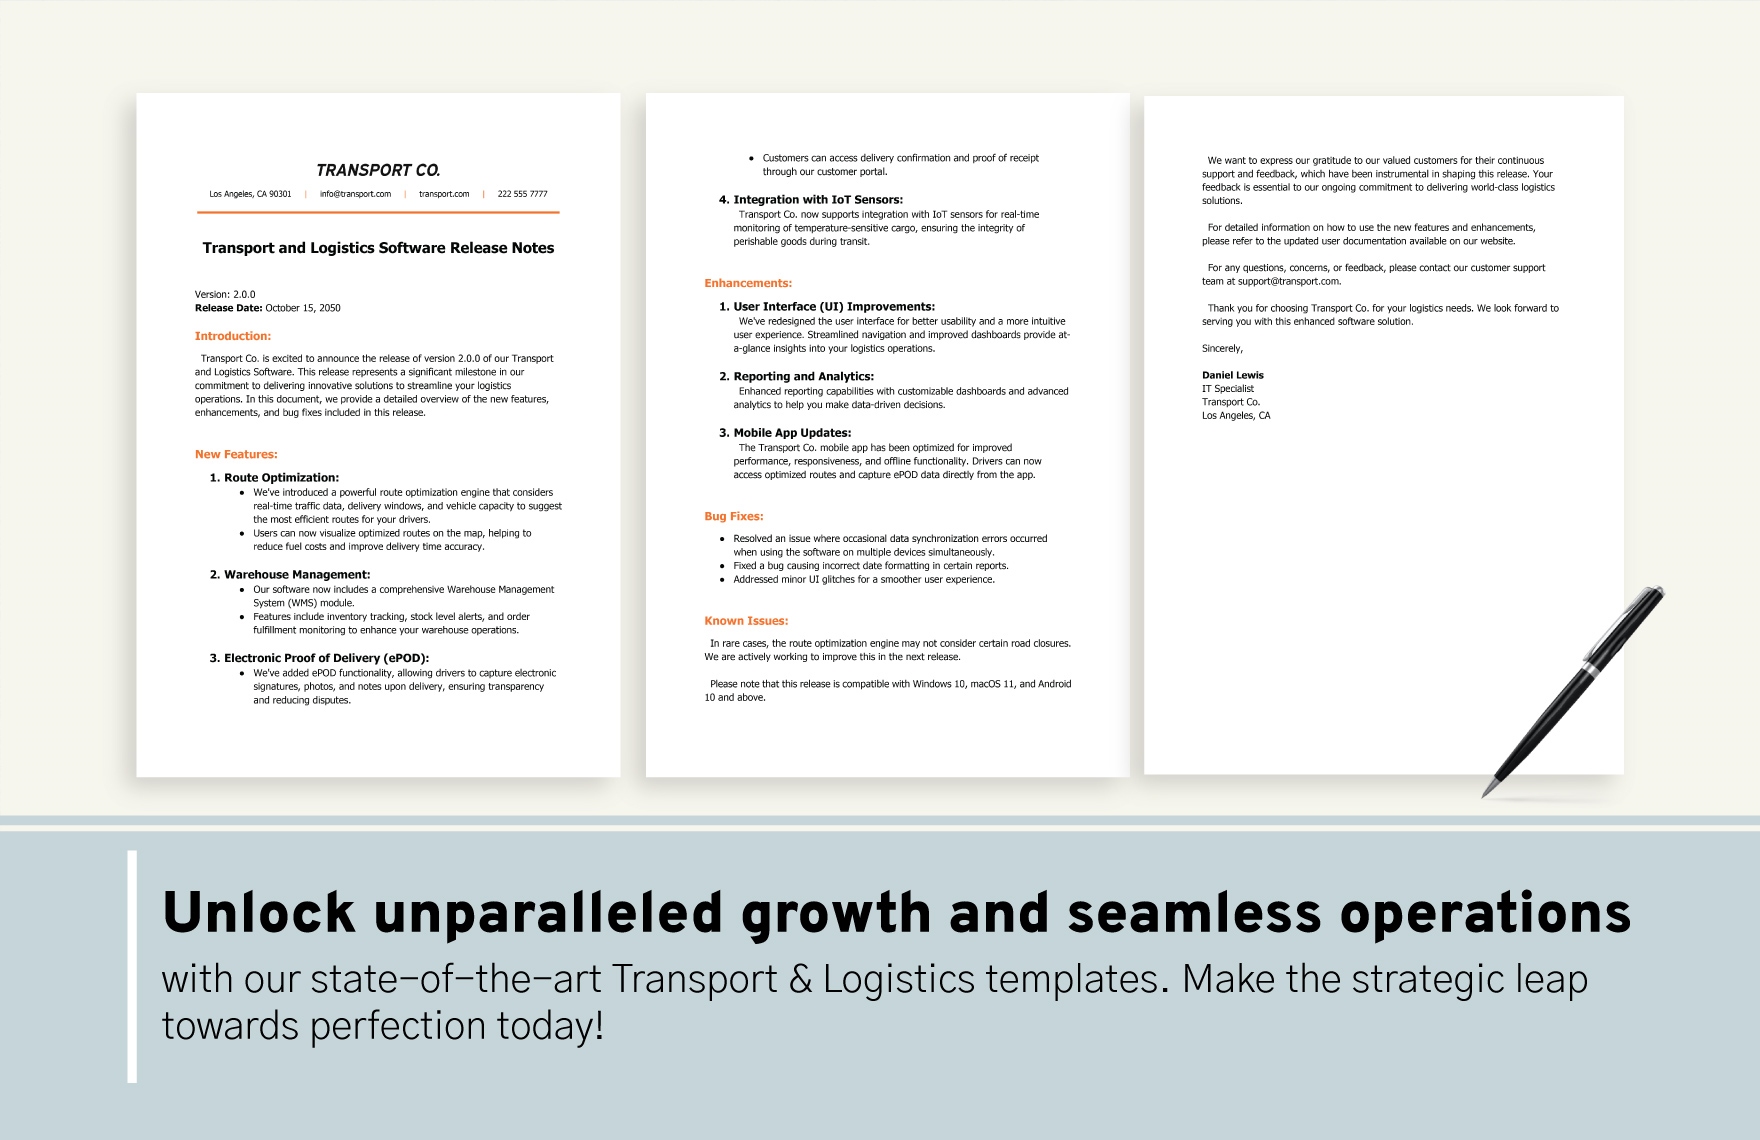 Transport and Logistics Software Release Notes Template